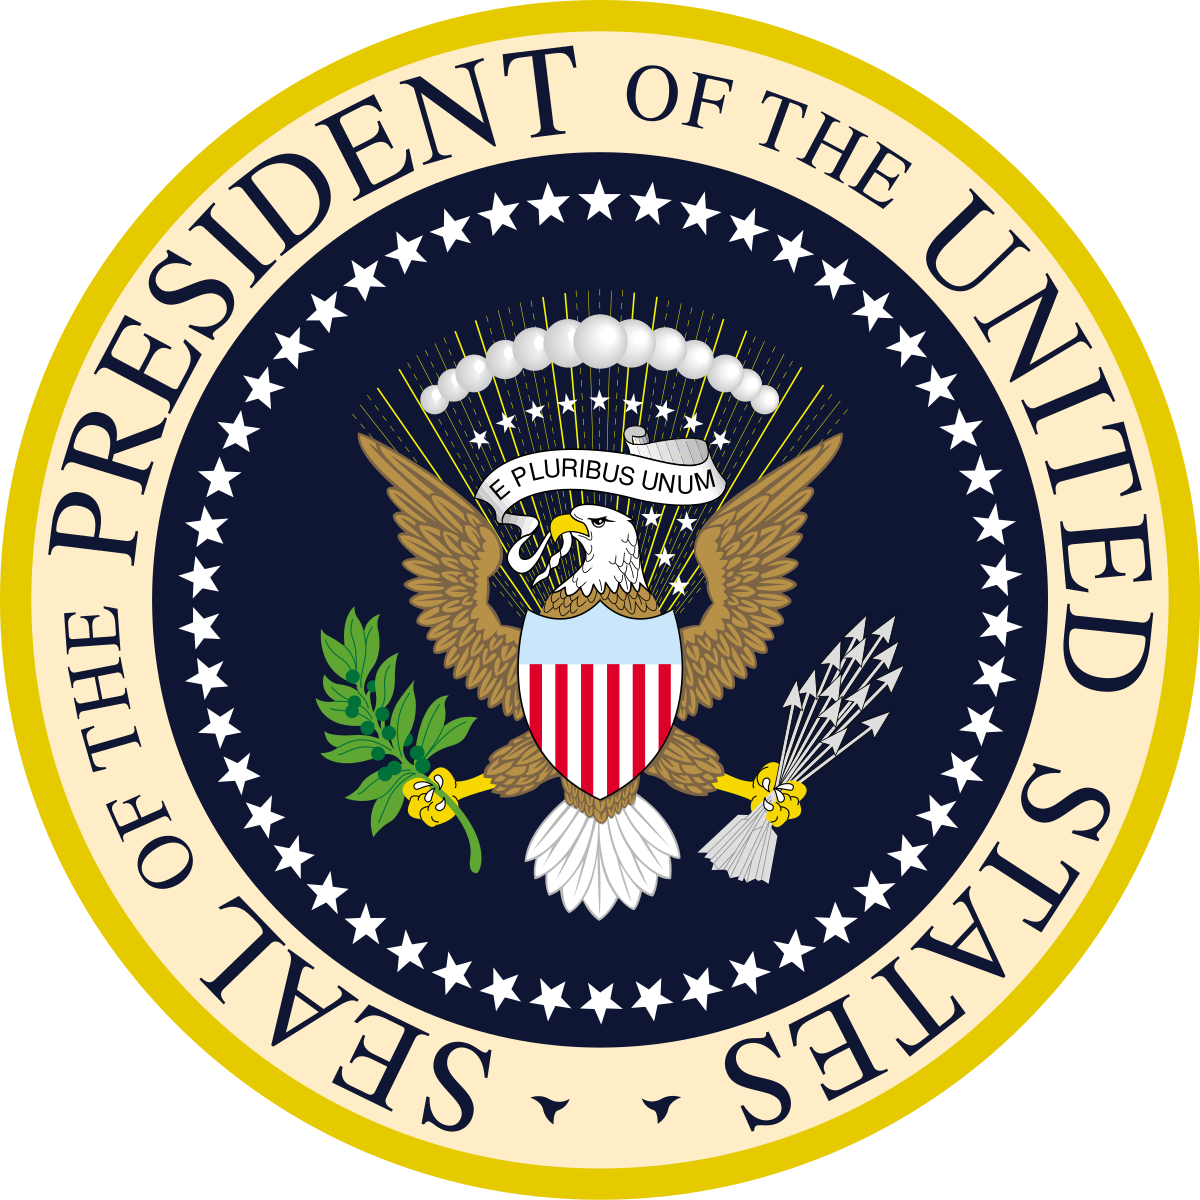 1200px-Seal_of_the_President_of_the_United_States.svg.png